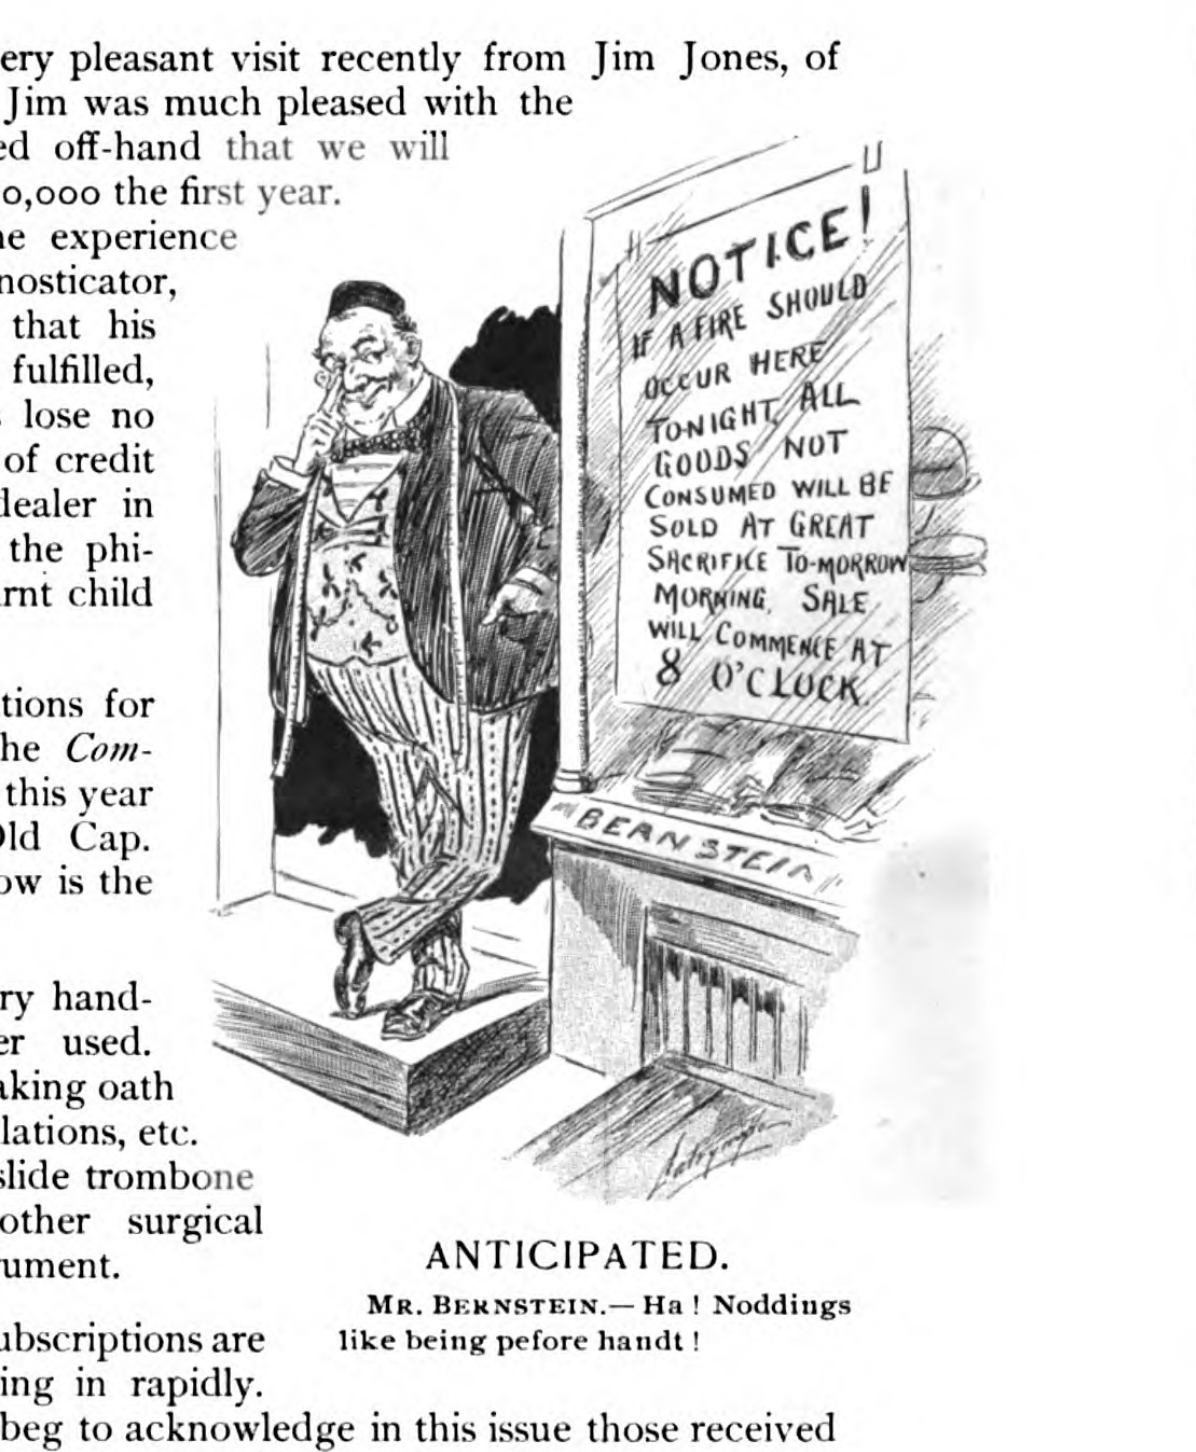 political cartoon, June 12 1901, showing a man looking at a sign in a shop window